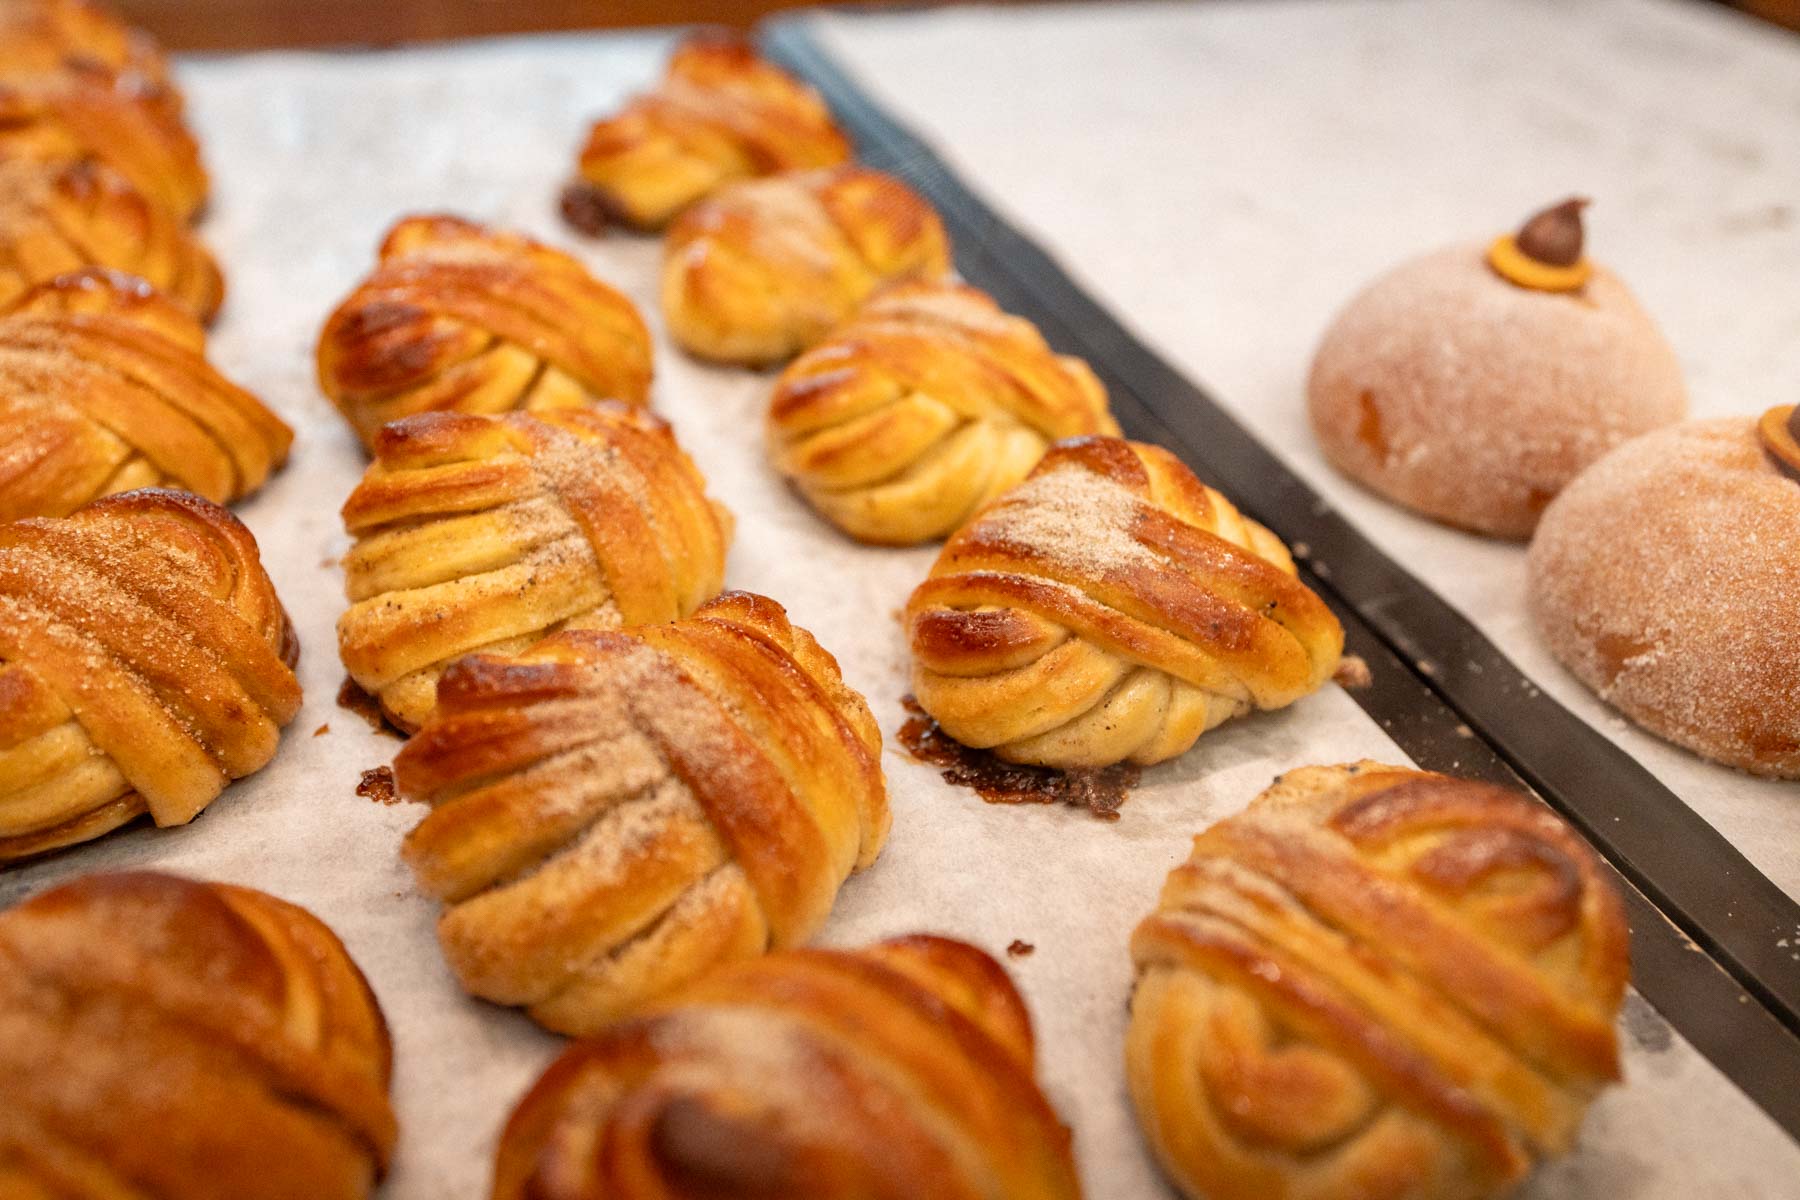 Best bakeries in the east Village